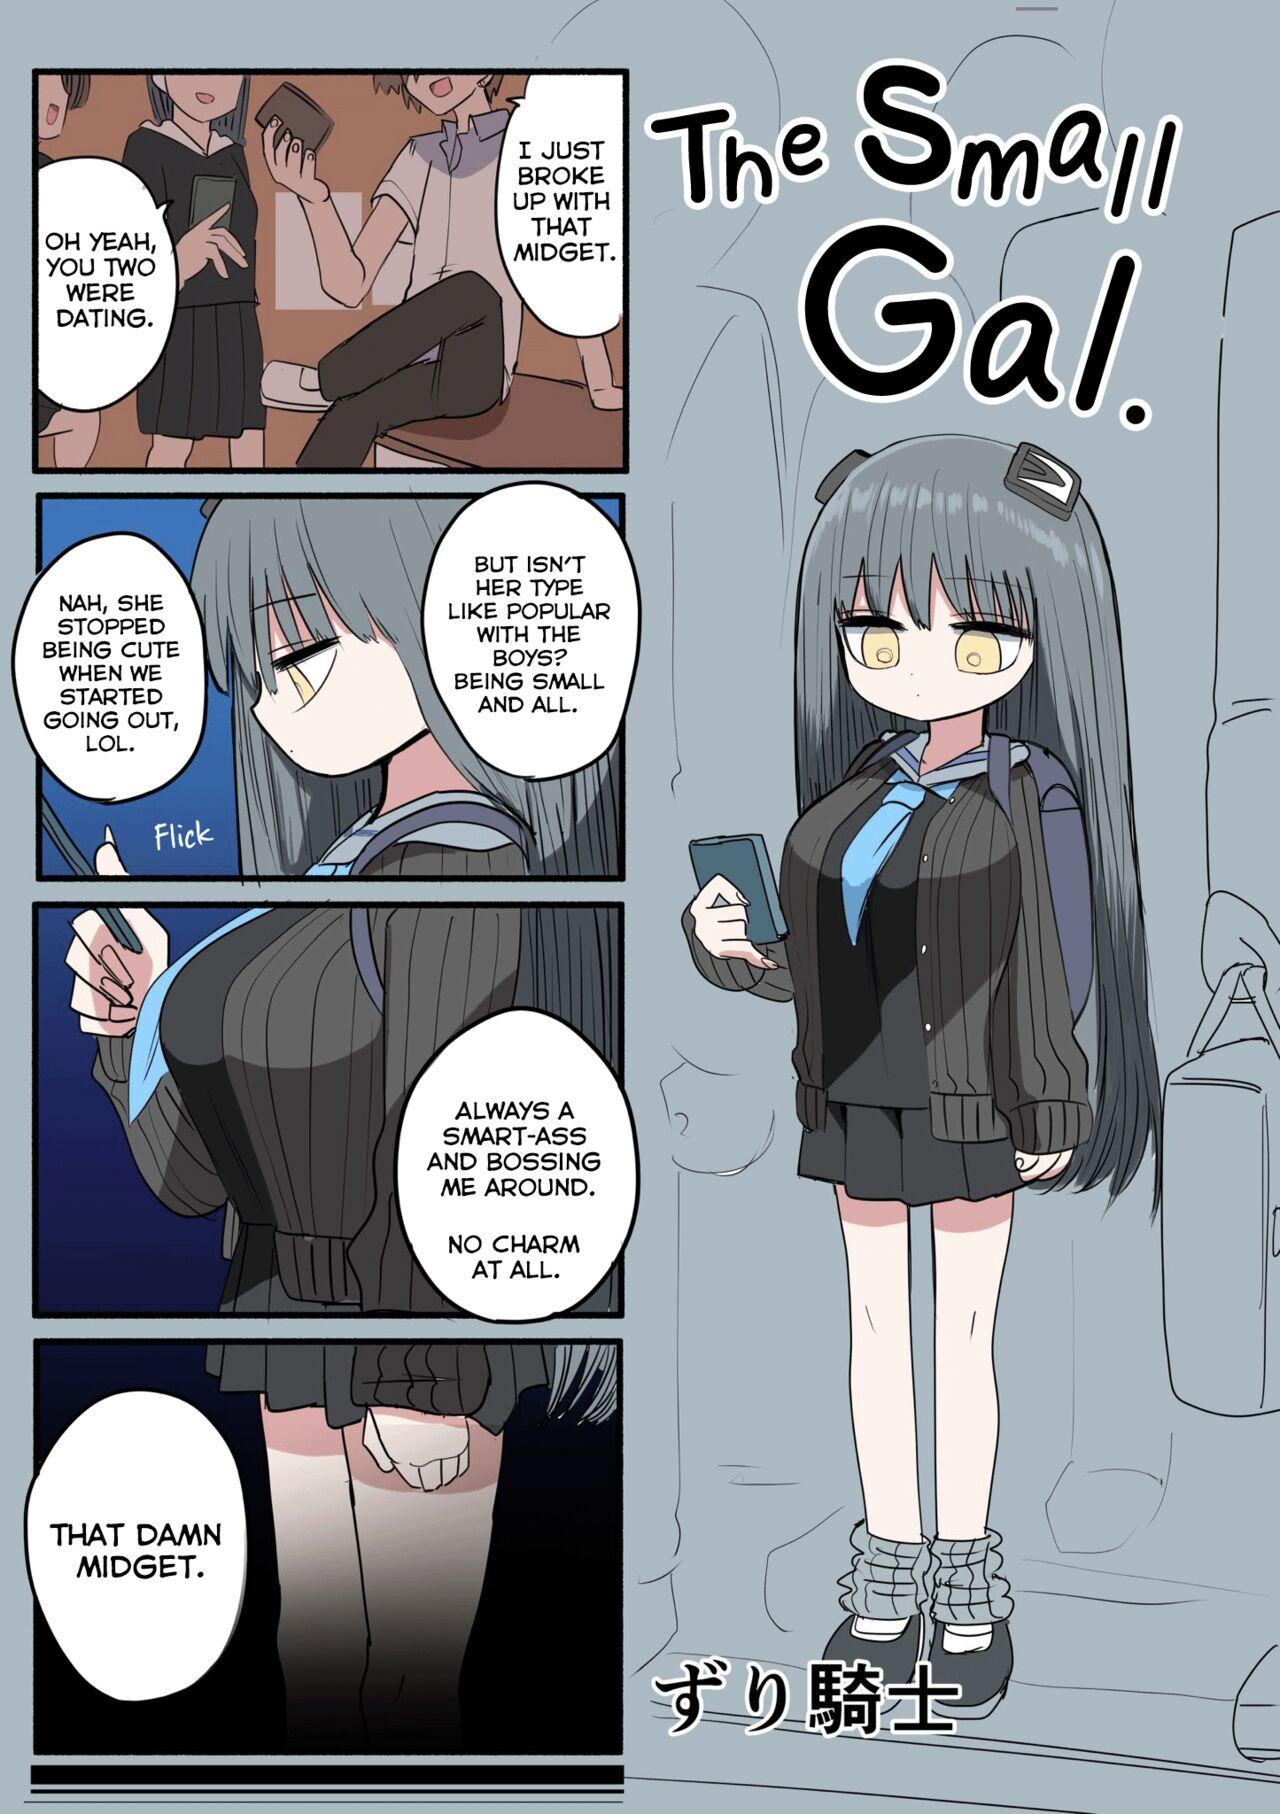 Chiisai Gal | The Small Gal 44